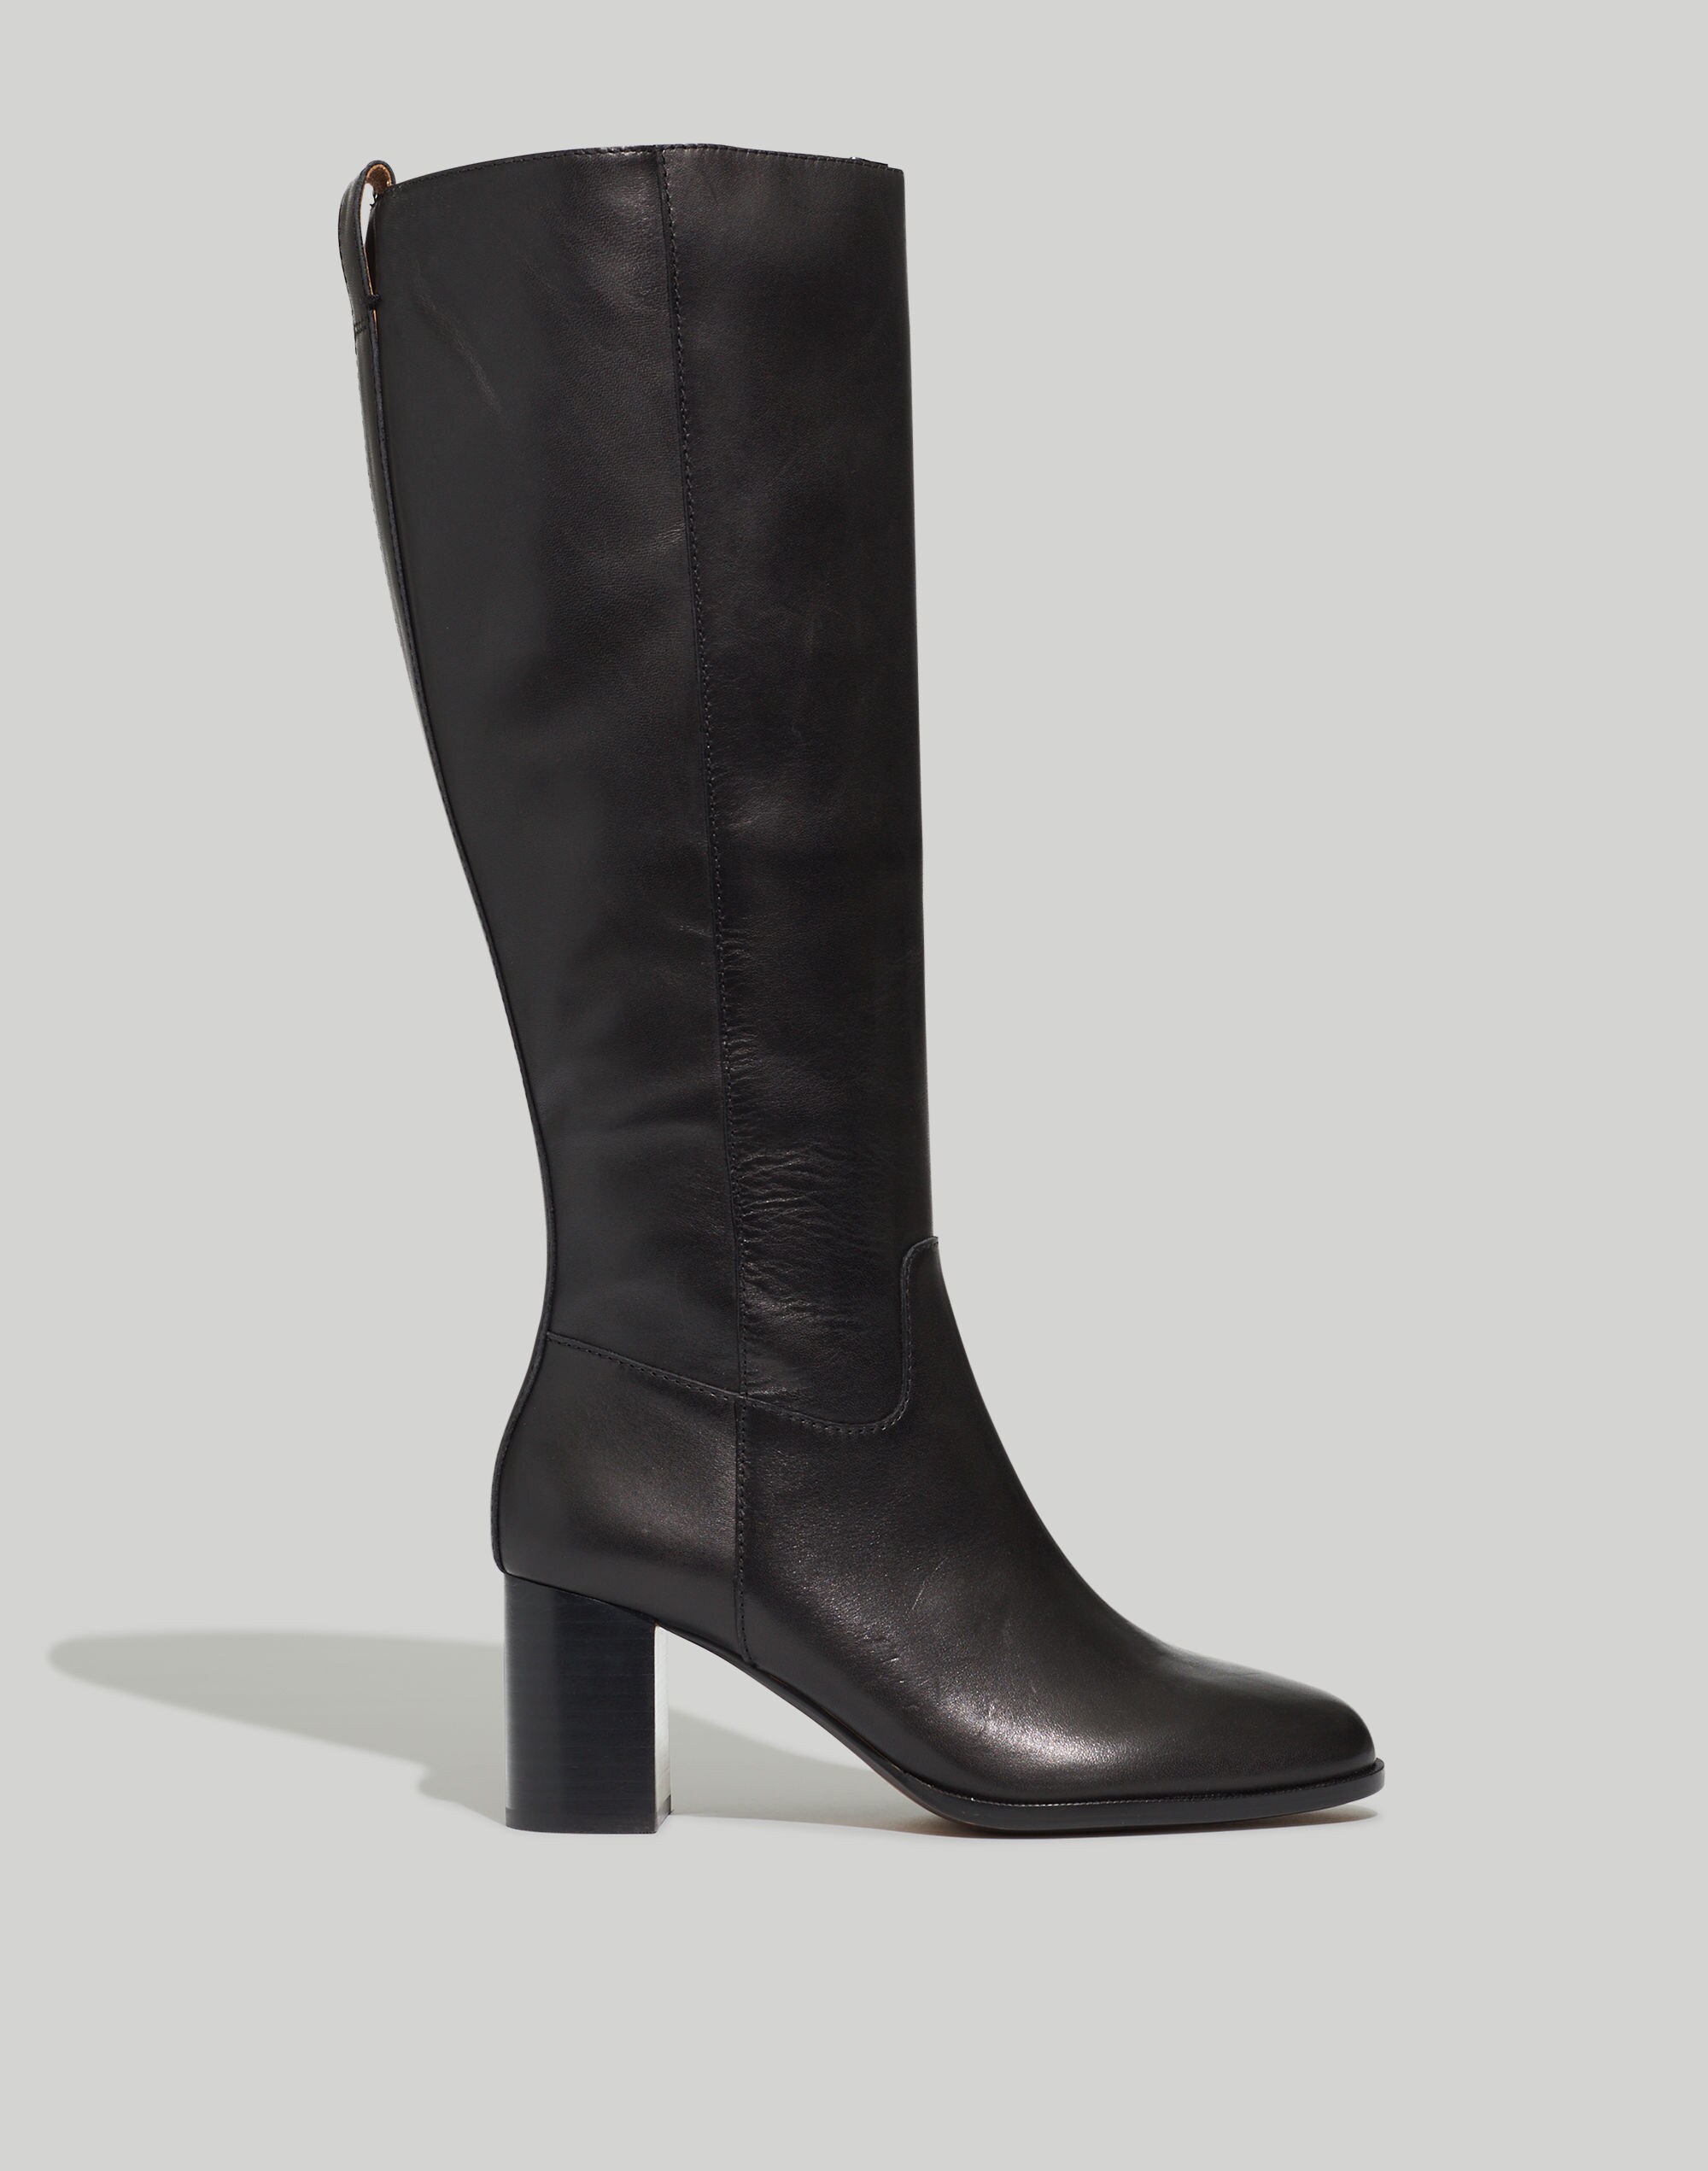 The Selina Tall Boot with Extended Calf